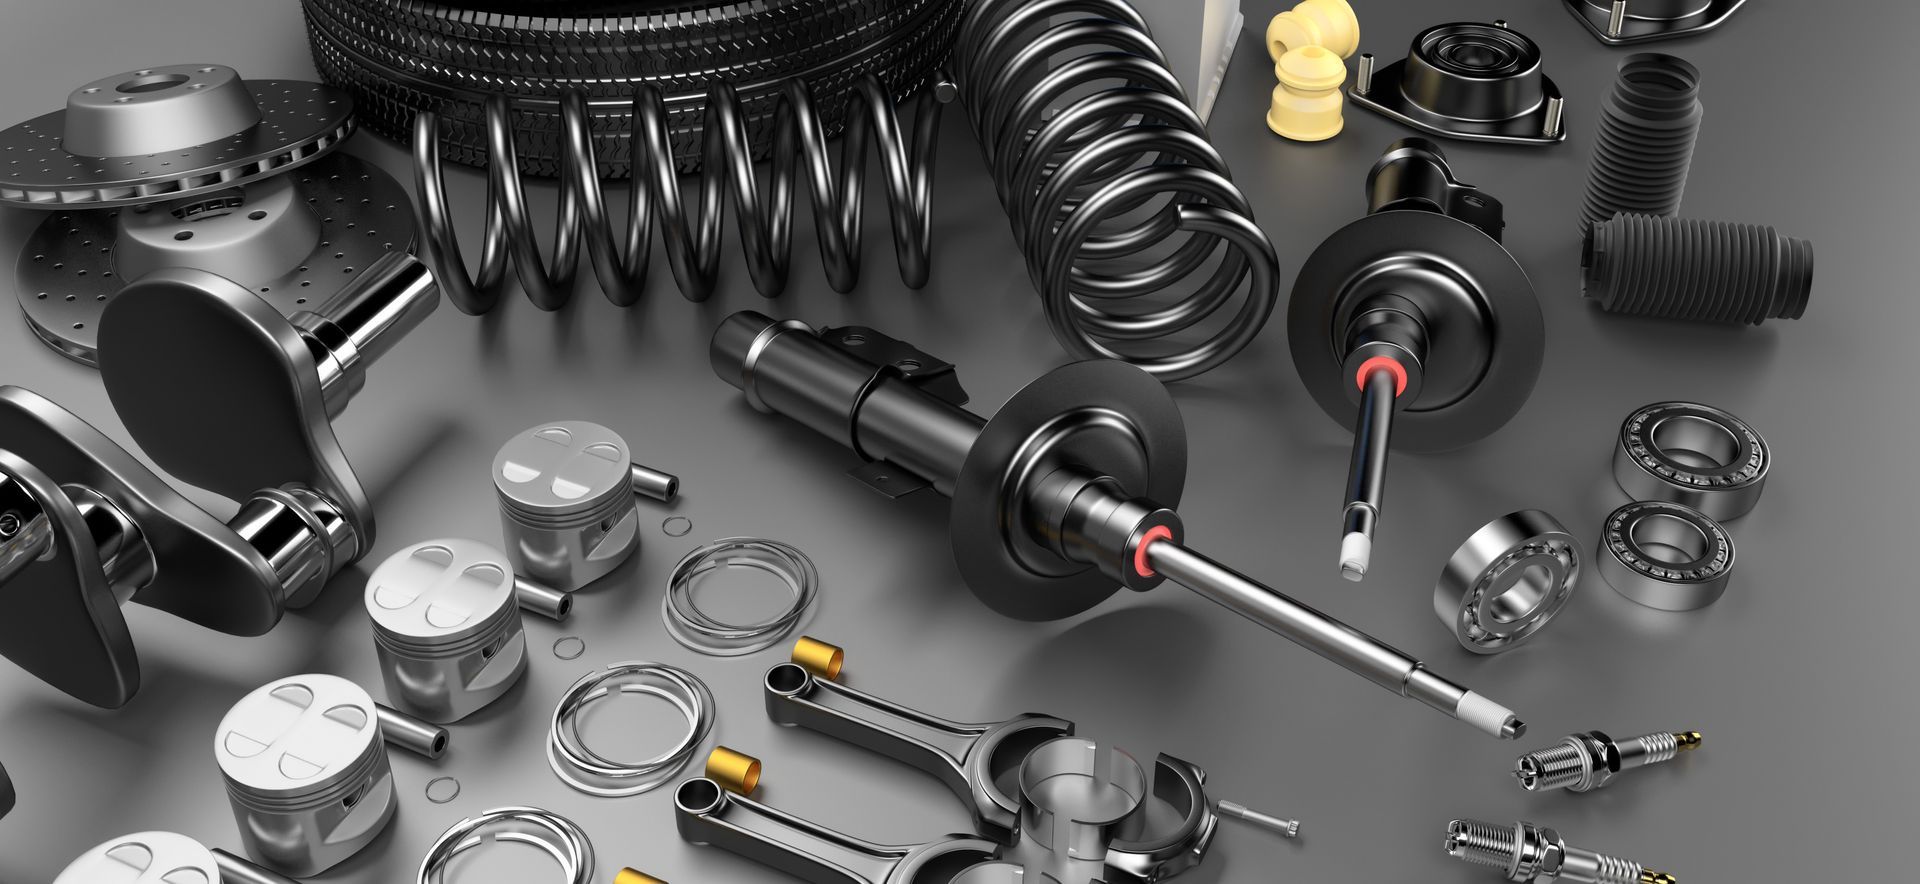 What Components & Systems Should Be Lubricated and How Often? | General Automotive Servicenter